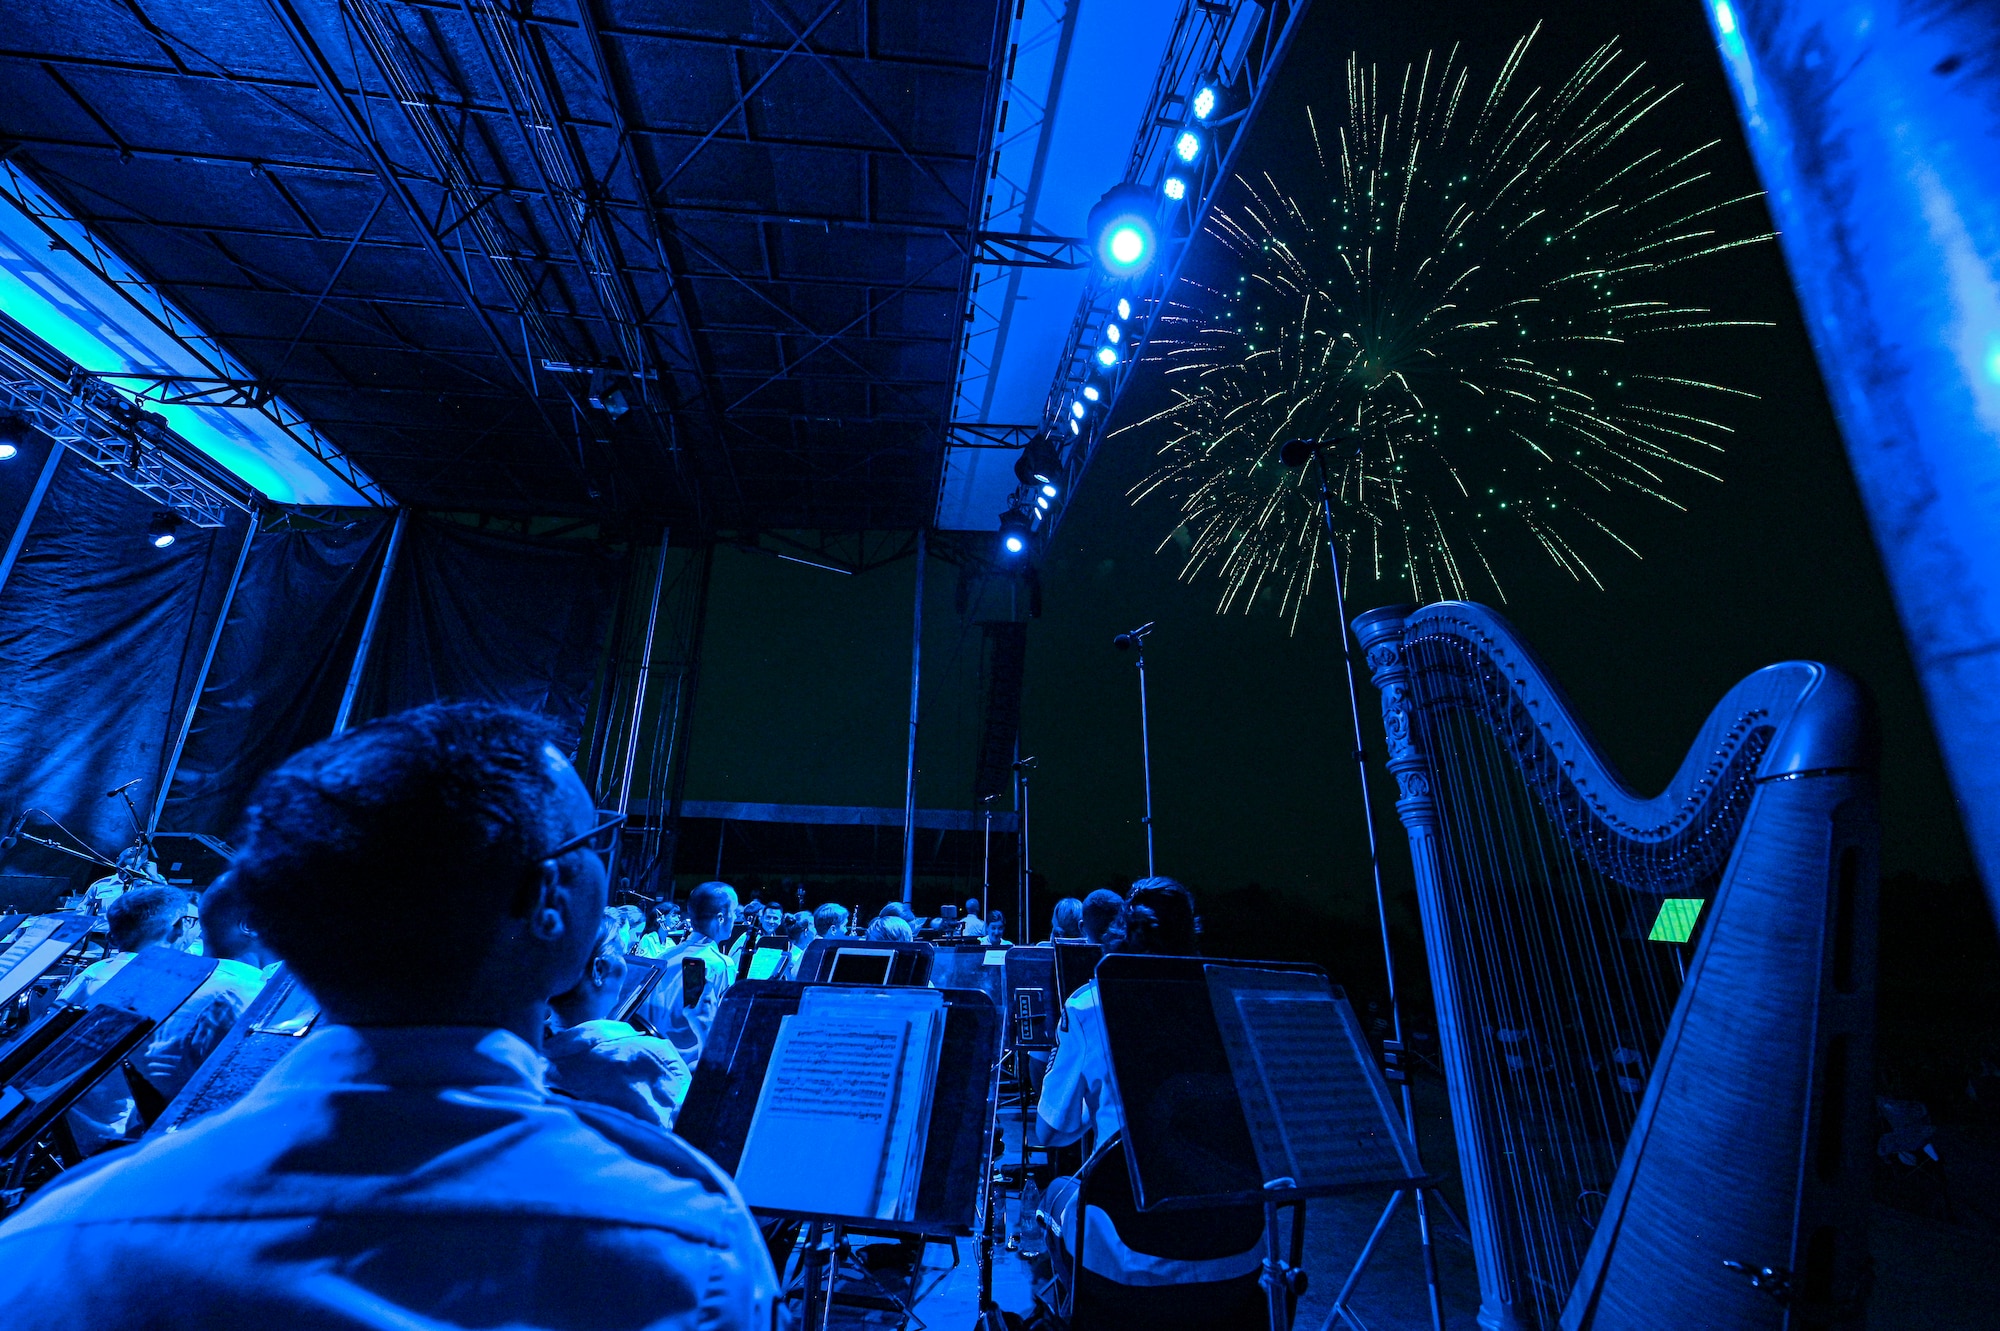 The U.S. Air Force Concert Band and the Singing Sergeants watch a fireworks show after a performance at an Independence Day fair at Mt. Vernon, Ill., July 4, 2022. 
The members of The Band and the United States Air Force Honor Guard share a common mission of representing the values of the Air Force and helping to foster a community across our nation and with our international allies. (U.S. Air Force photo by Airman Bill Guilliam)